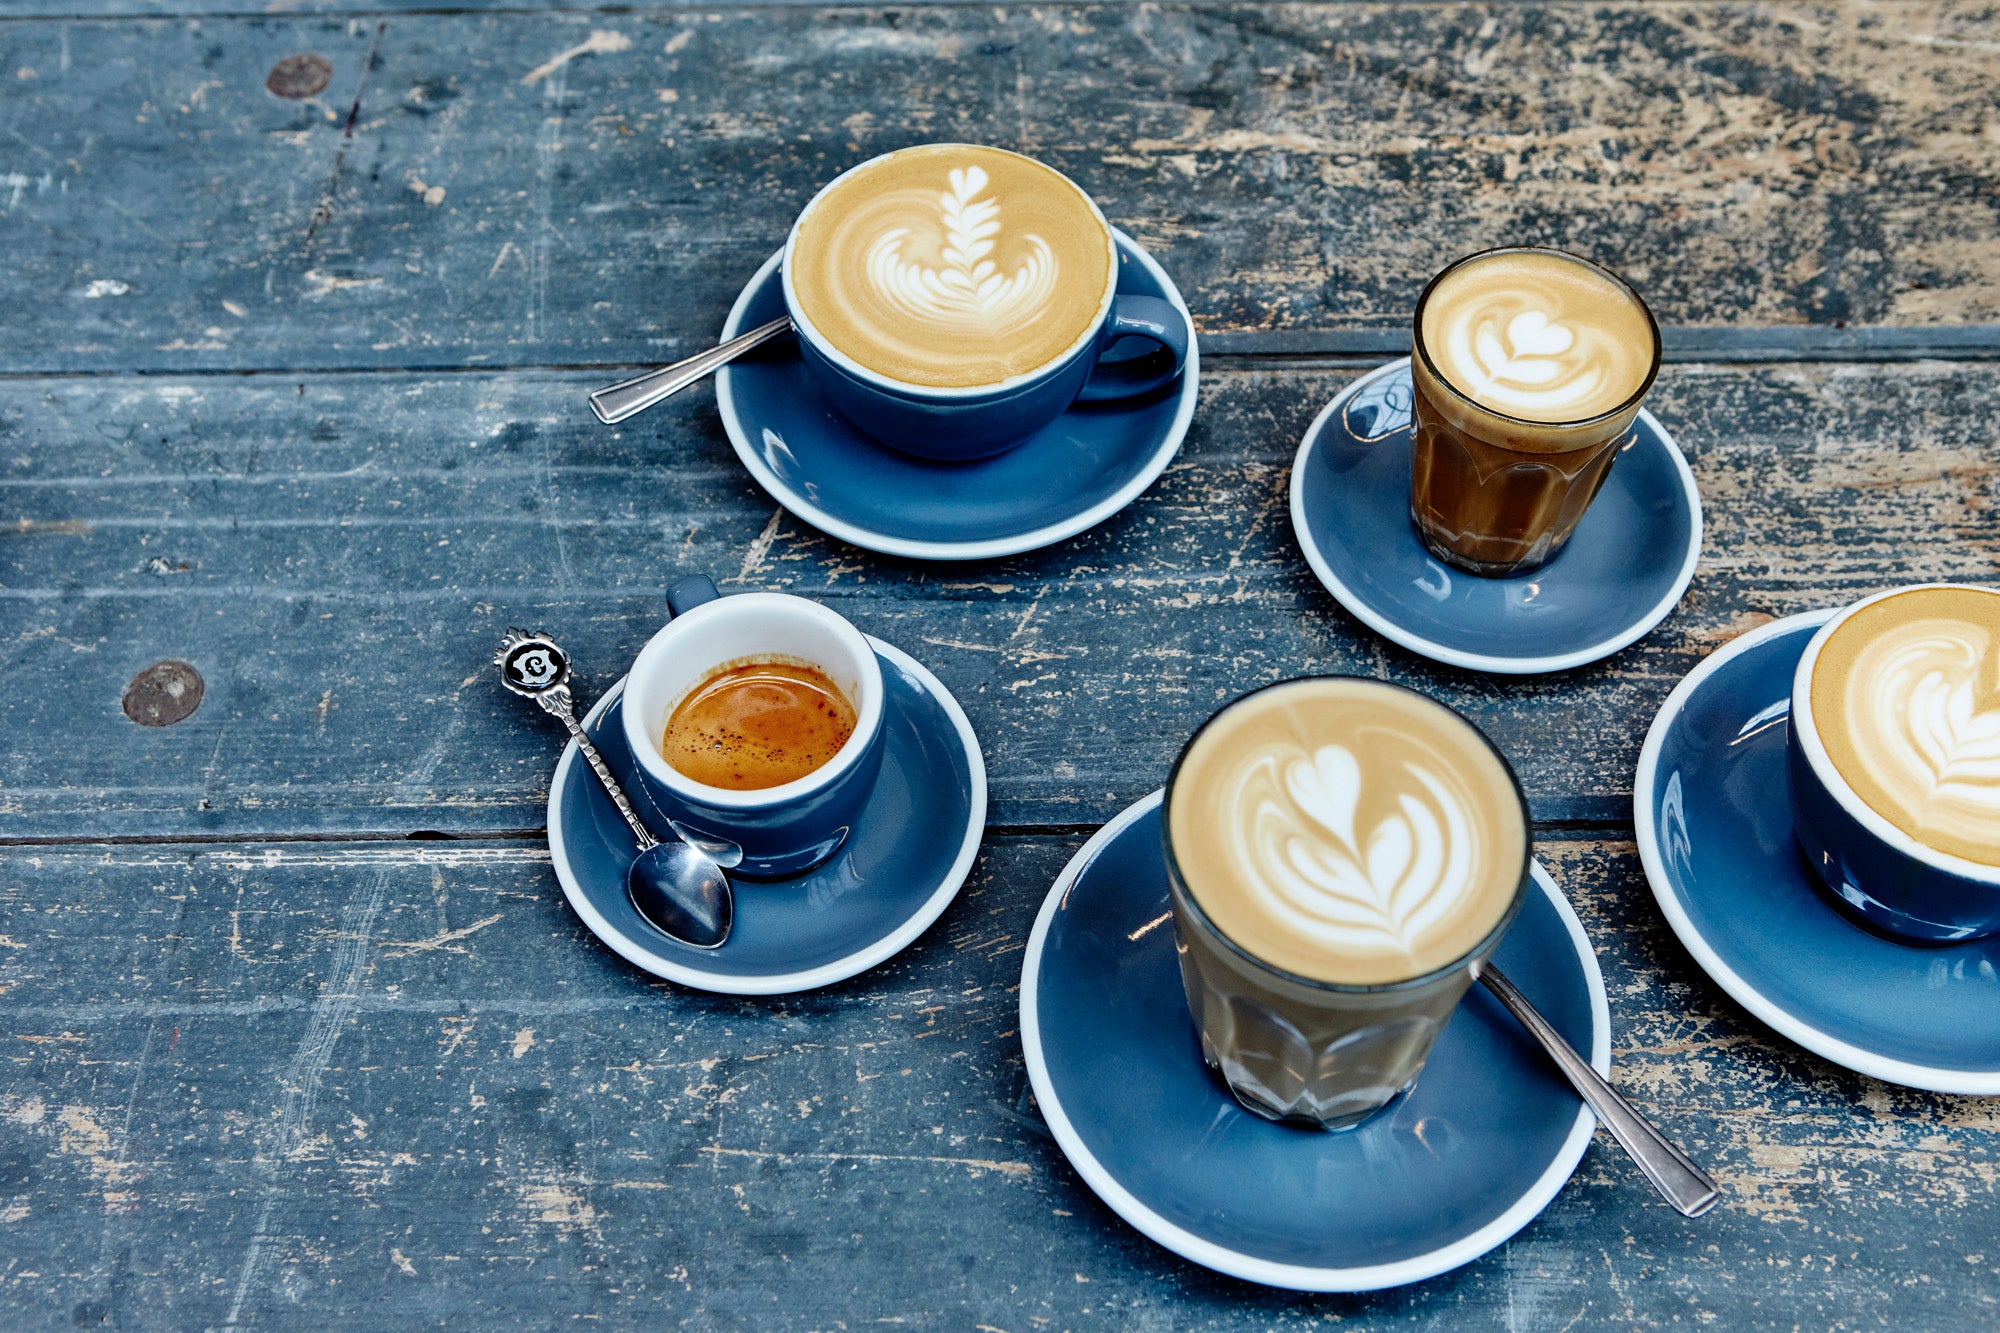 Flat white, espresso, cappuccino, latte and mocha from Caravan Coffee Roasters at Caravan Exmouth Market restaurant